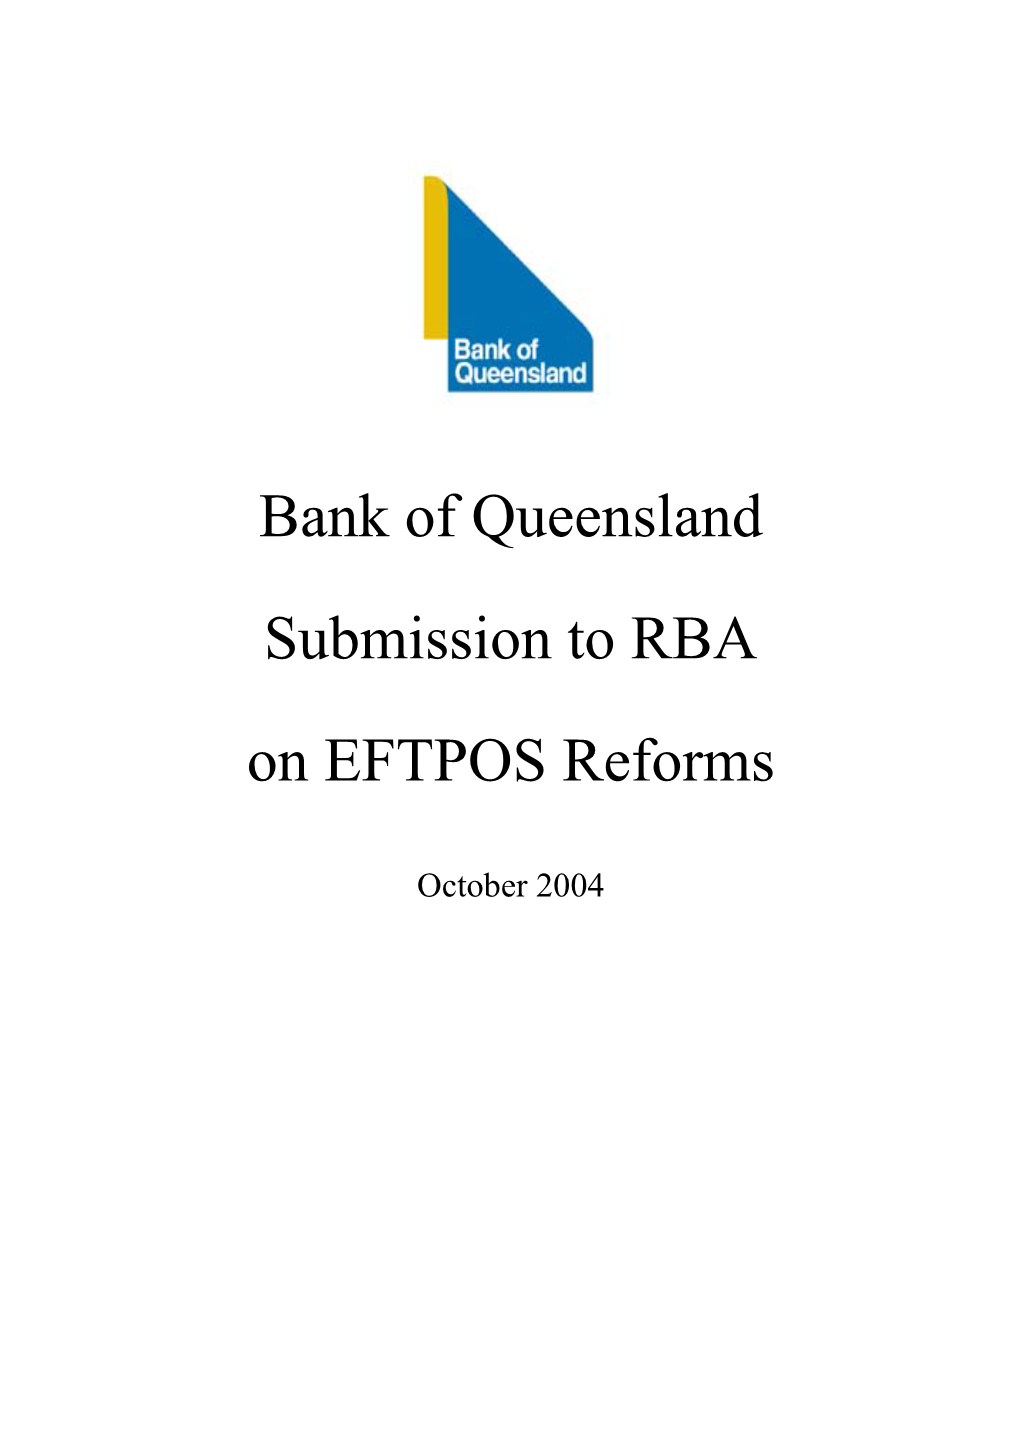 Bank of Queensland Submission to RBA on EFTPOS Reforms